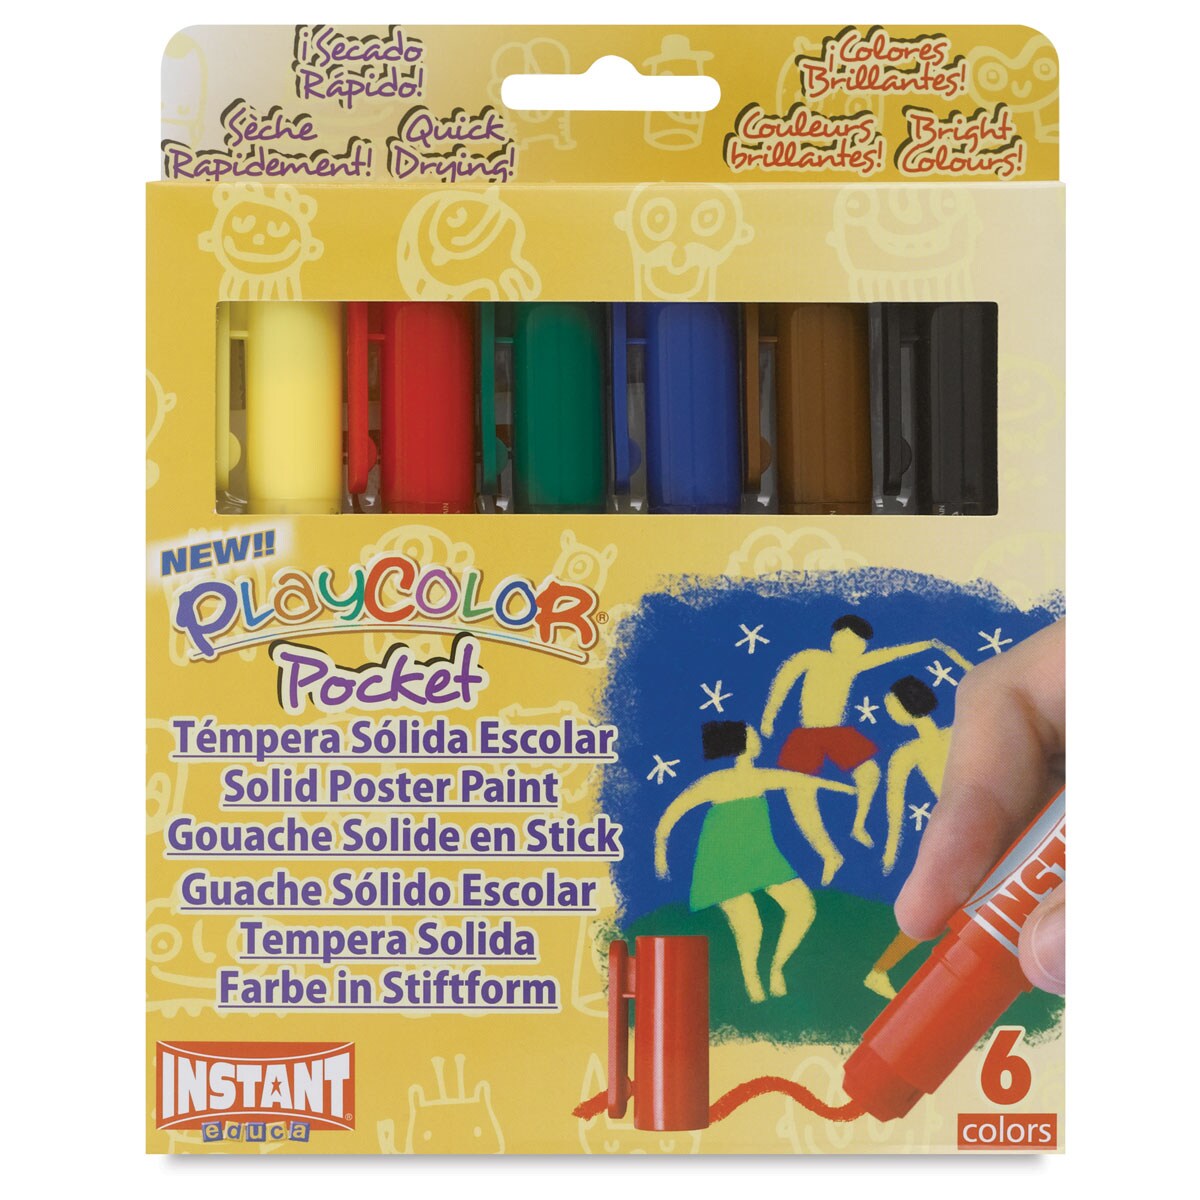 Playcolor - Standard Colors, Set of 6, Pocket Sized